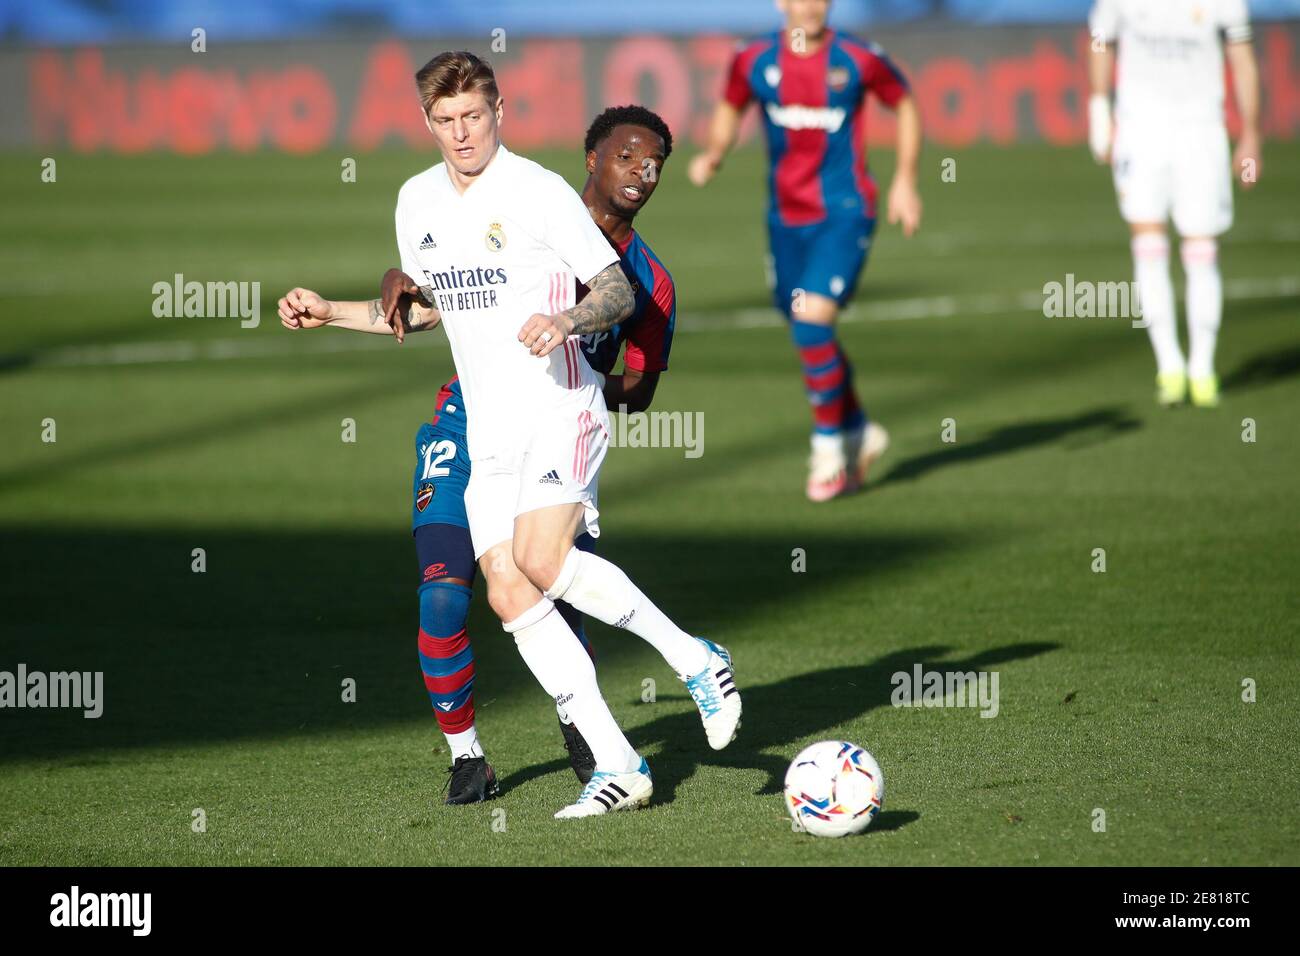 Toni Kroos of Real Madrid and Michael Malsa of Levante in action during the spanish league, La Liga Santander, football match played between Real Madrid and Levante UD at Ciudad Deportiva Real Madrid on january 30, 2021, in Valdebebas, Madrid, Spain. / LM Stock Photo